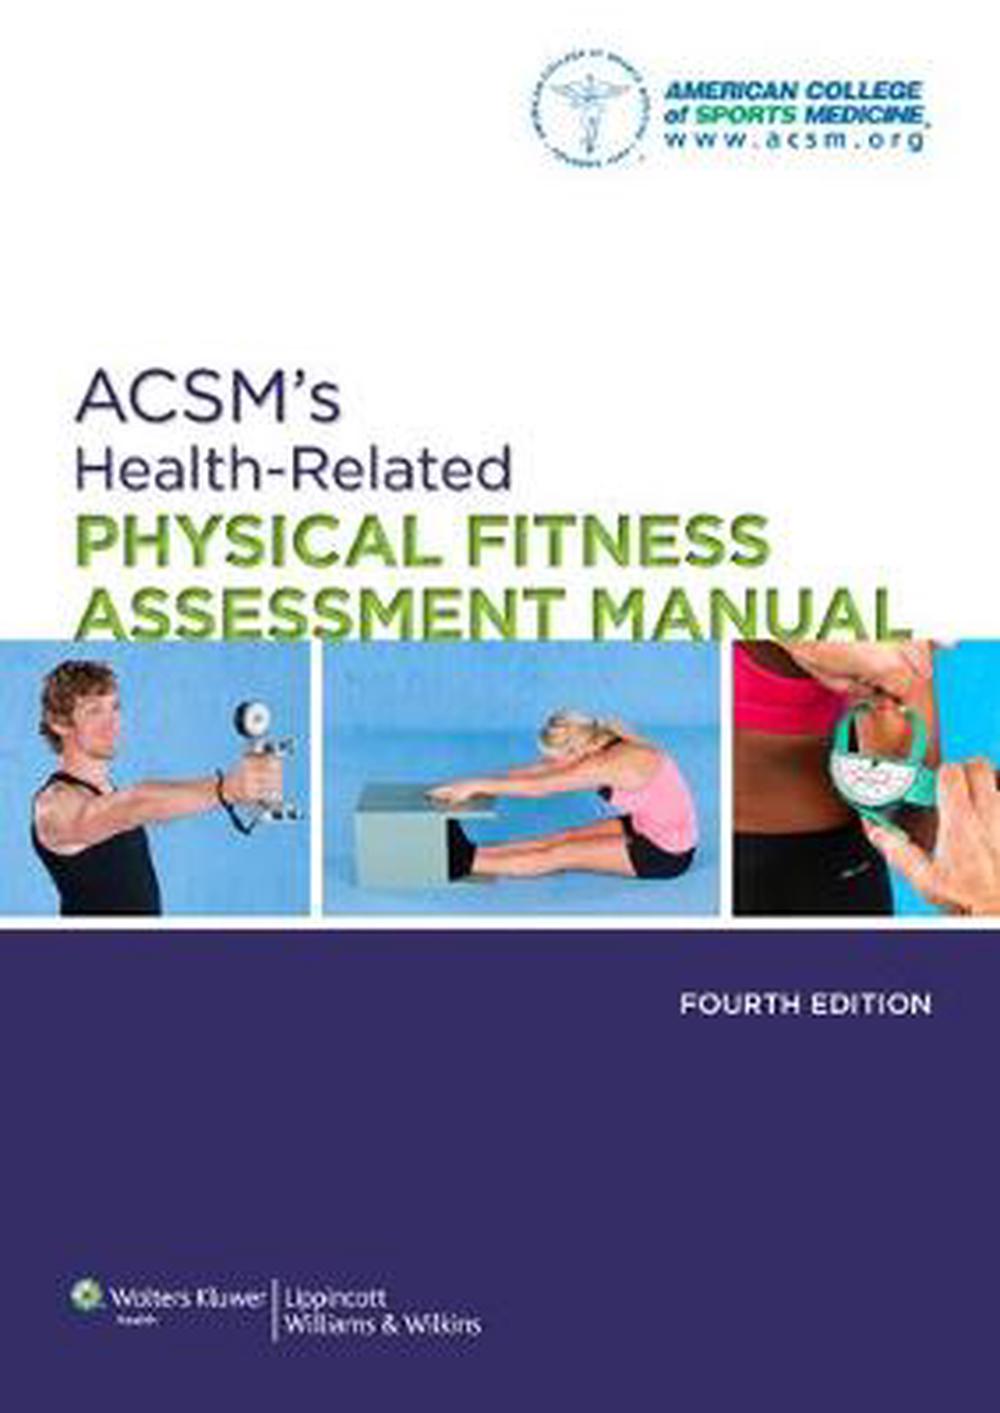 ACSM's HealthRelated Physical Fitness Assessment Manual, 4th Edition